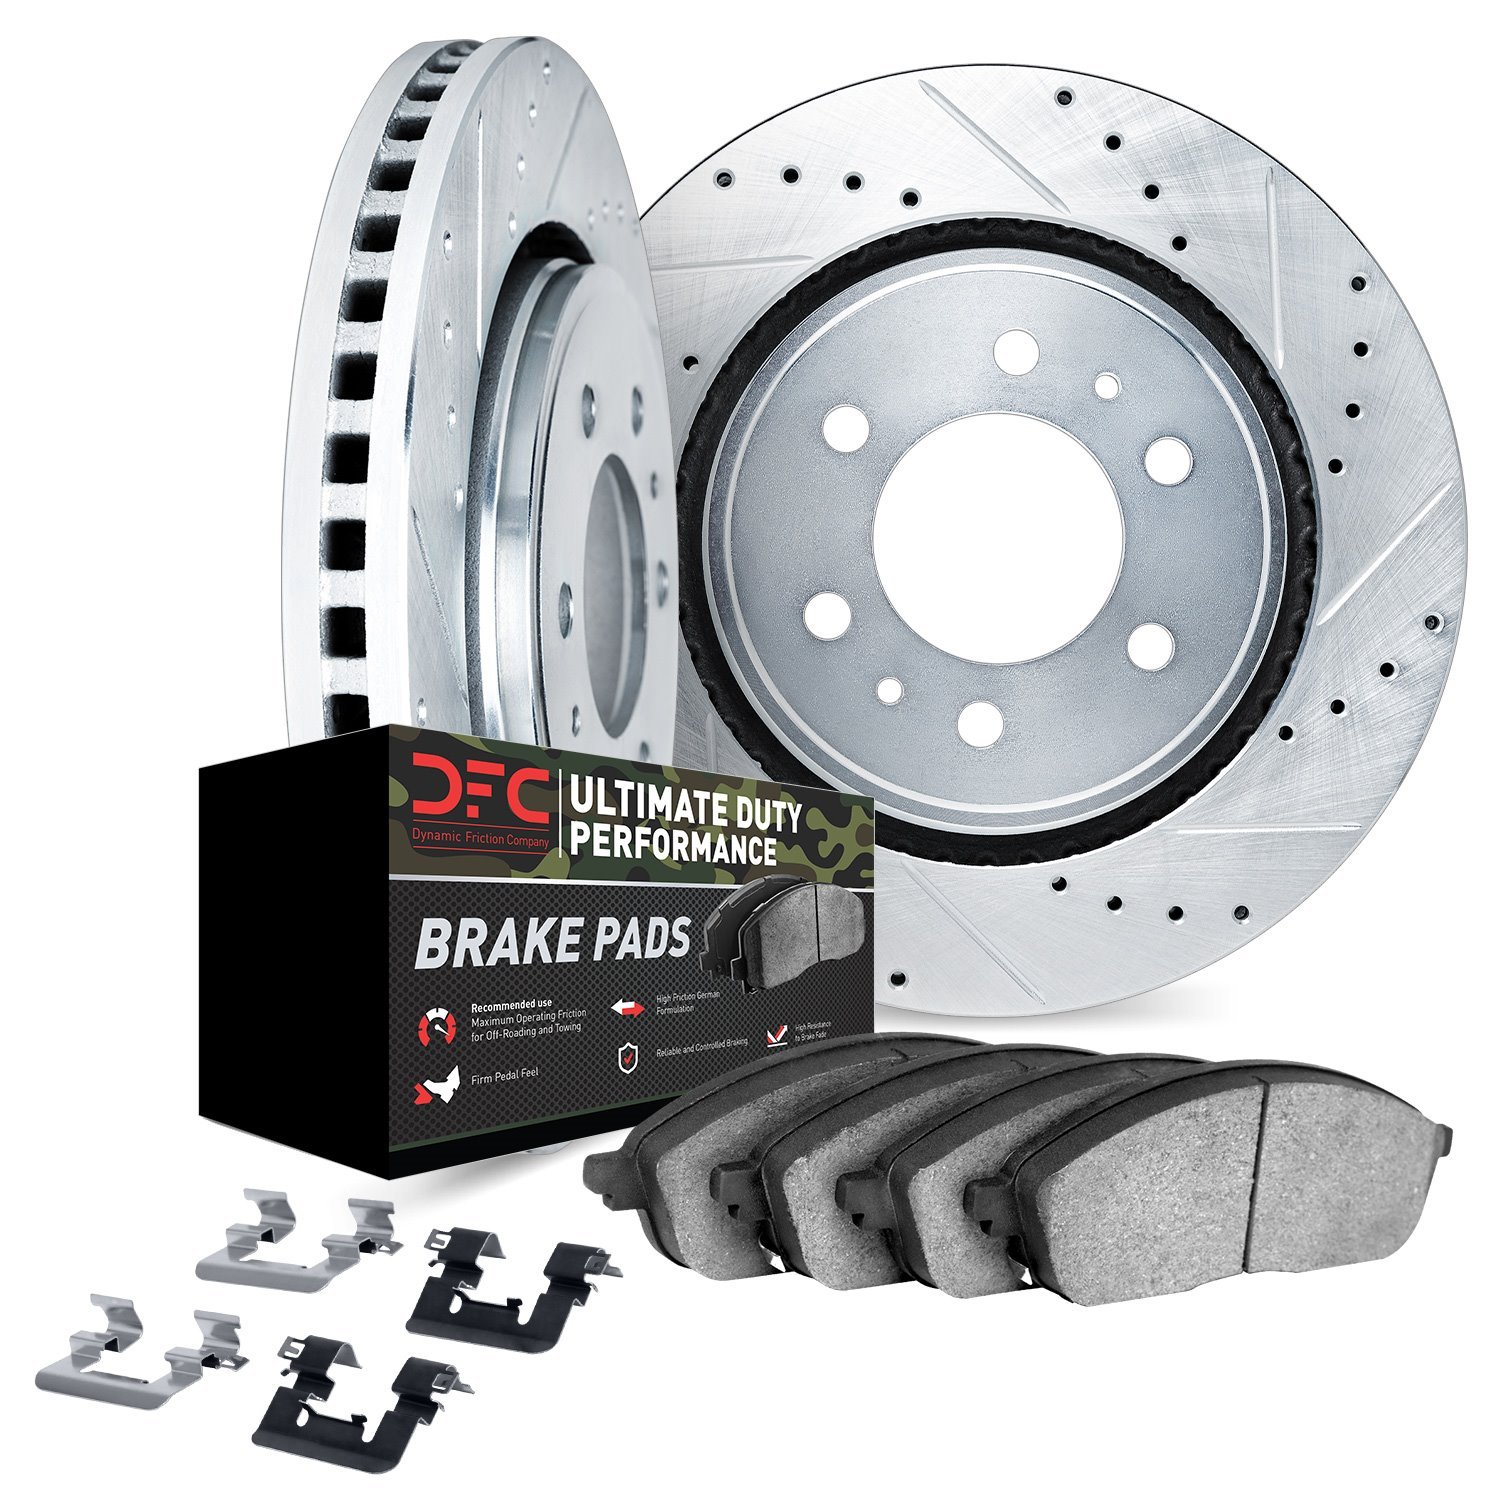 7412-40026 Drilled/Slotted Brake Rotors with Ultimate-Duty Brake Pads Kit & Hardware [Silver], Fits Select Mopar, Position: Rear